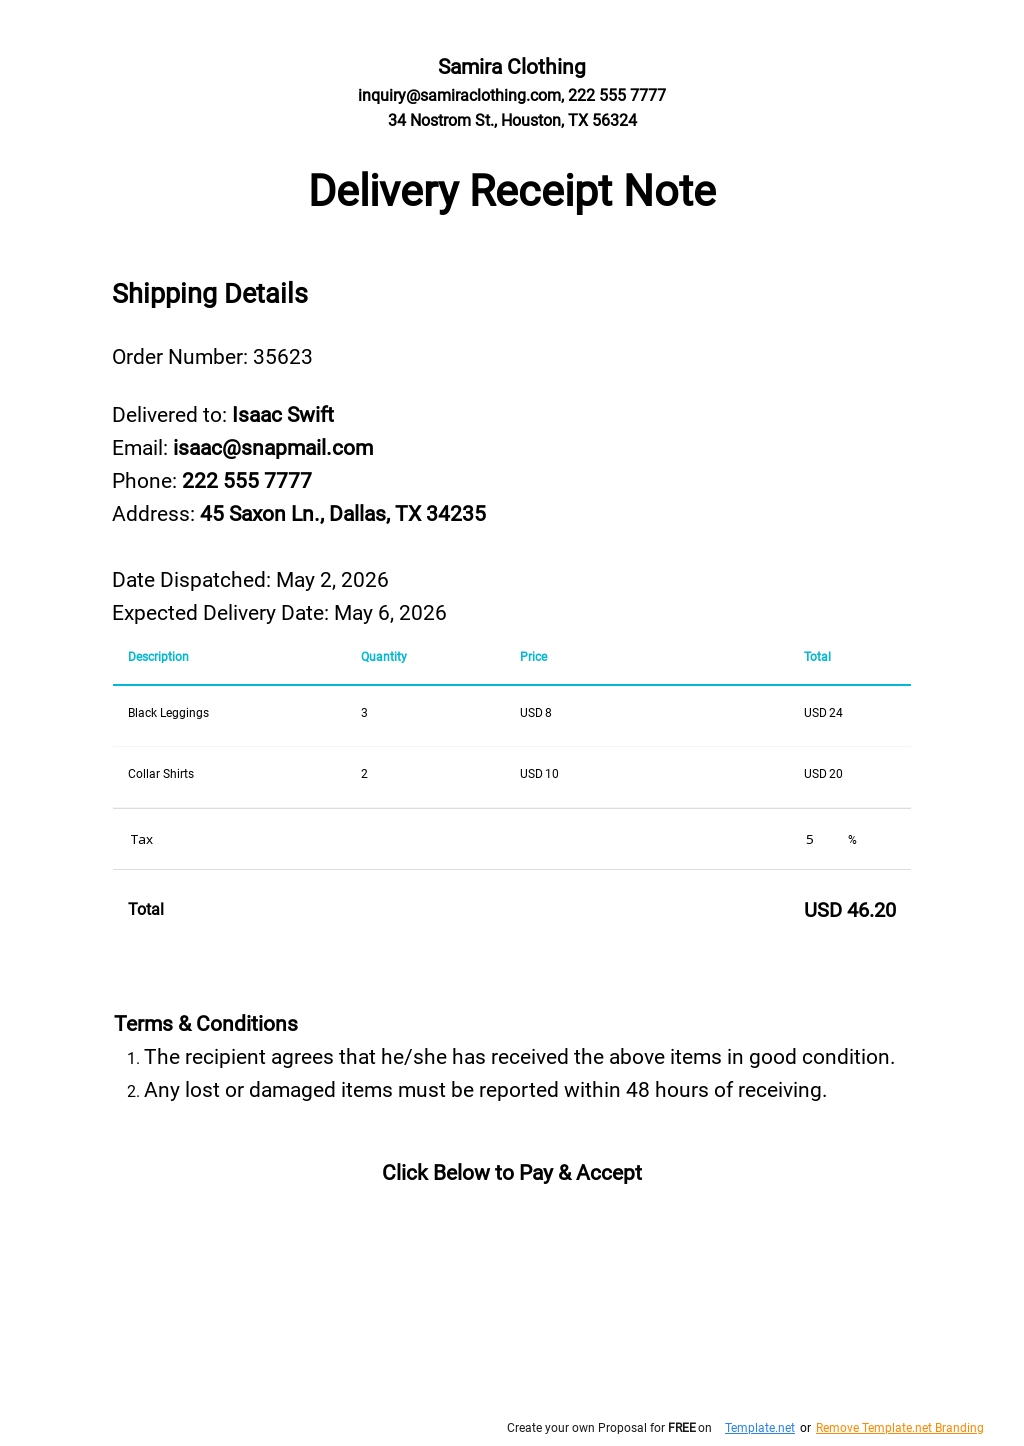 Delivery Receipt Note Template.jpe